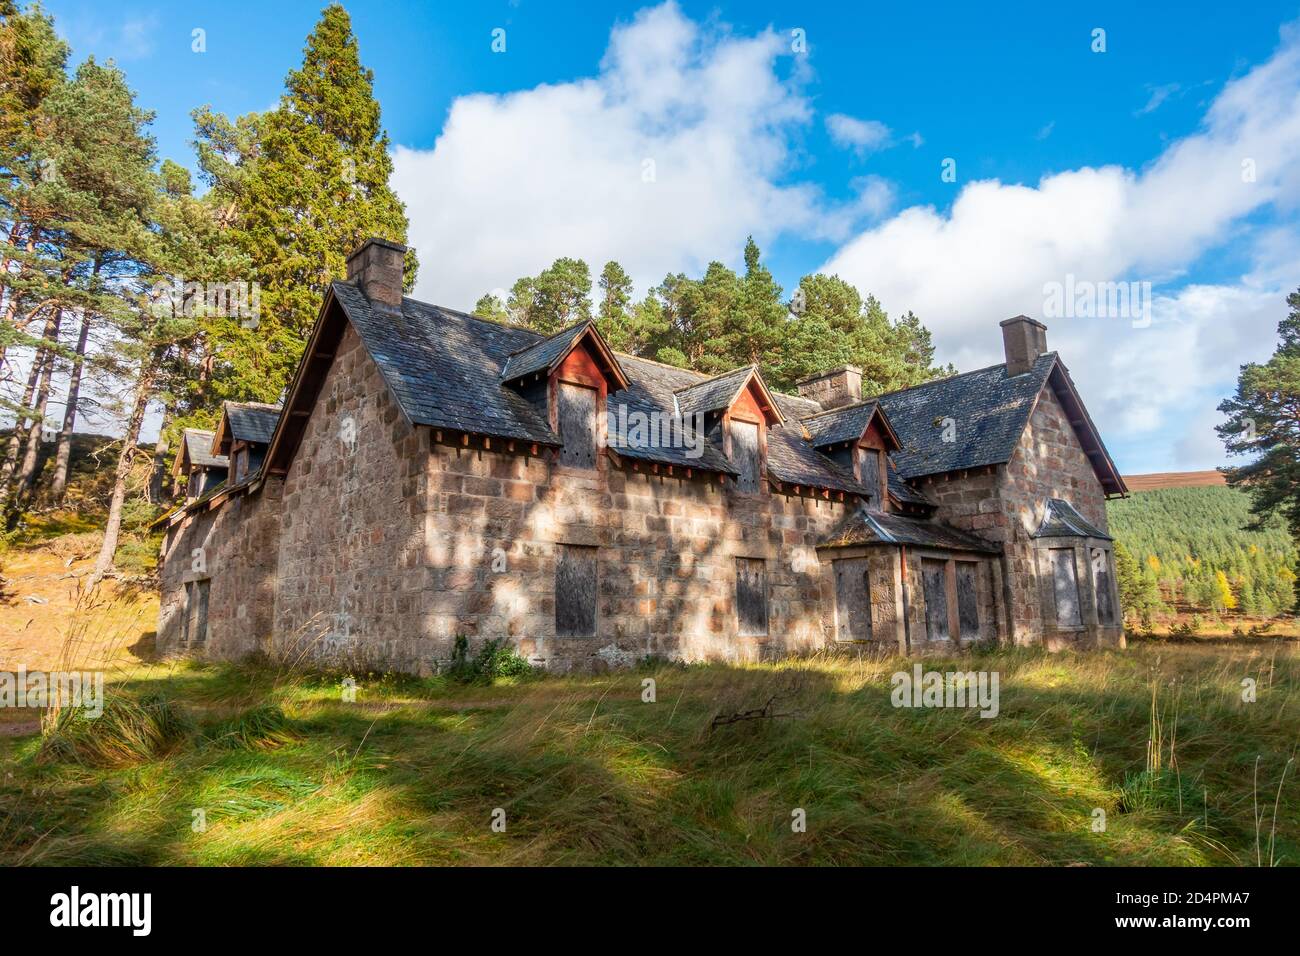 The boarded up building of Derry Lodge near Braemar in Aberdeenshire, Scotland, UK Stock Photo